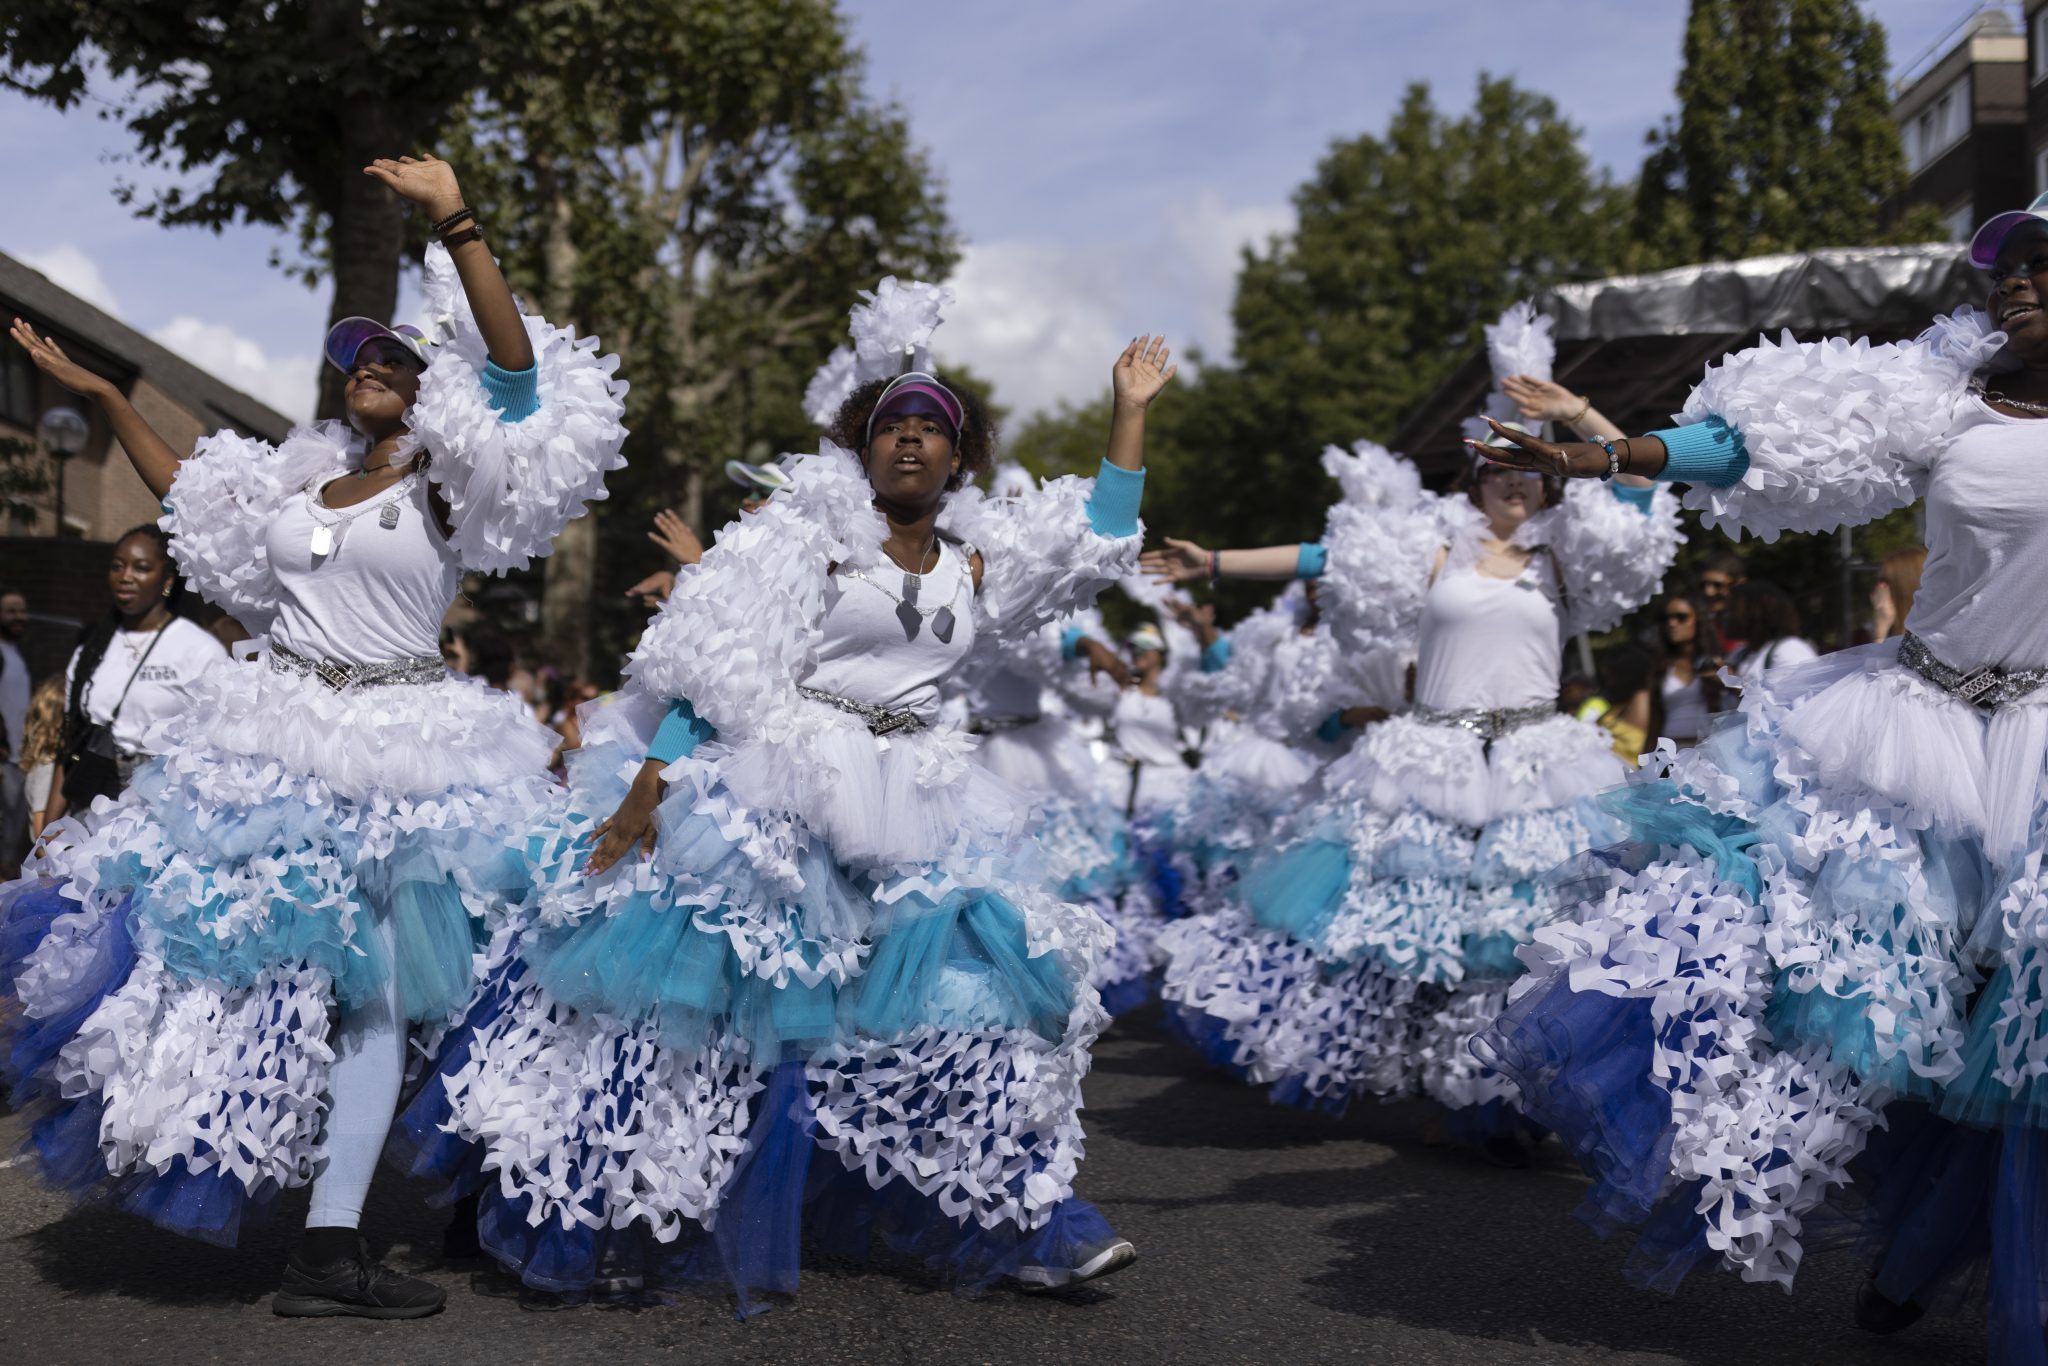 LONDON, ENGLAND - AUGUST 28: Performers process down the route during the Notting Hill carnival on August 28, 2022 in London, England. The Caribbean carnival returns to the streets of Notting Hill after a two-year hiatus due to the Covid pandemic. (Photo by Dan Kitwood/Getty Images)